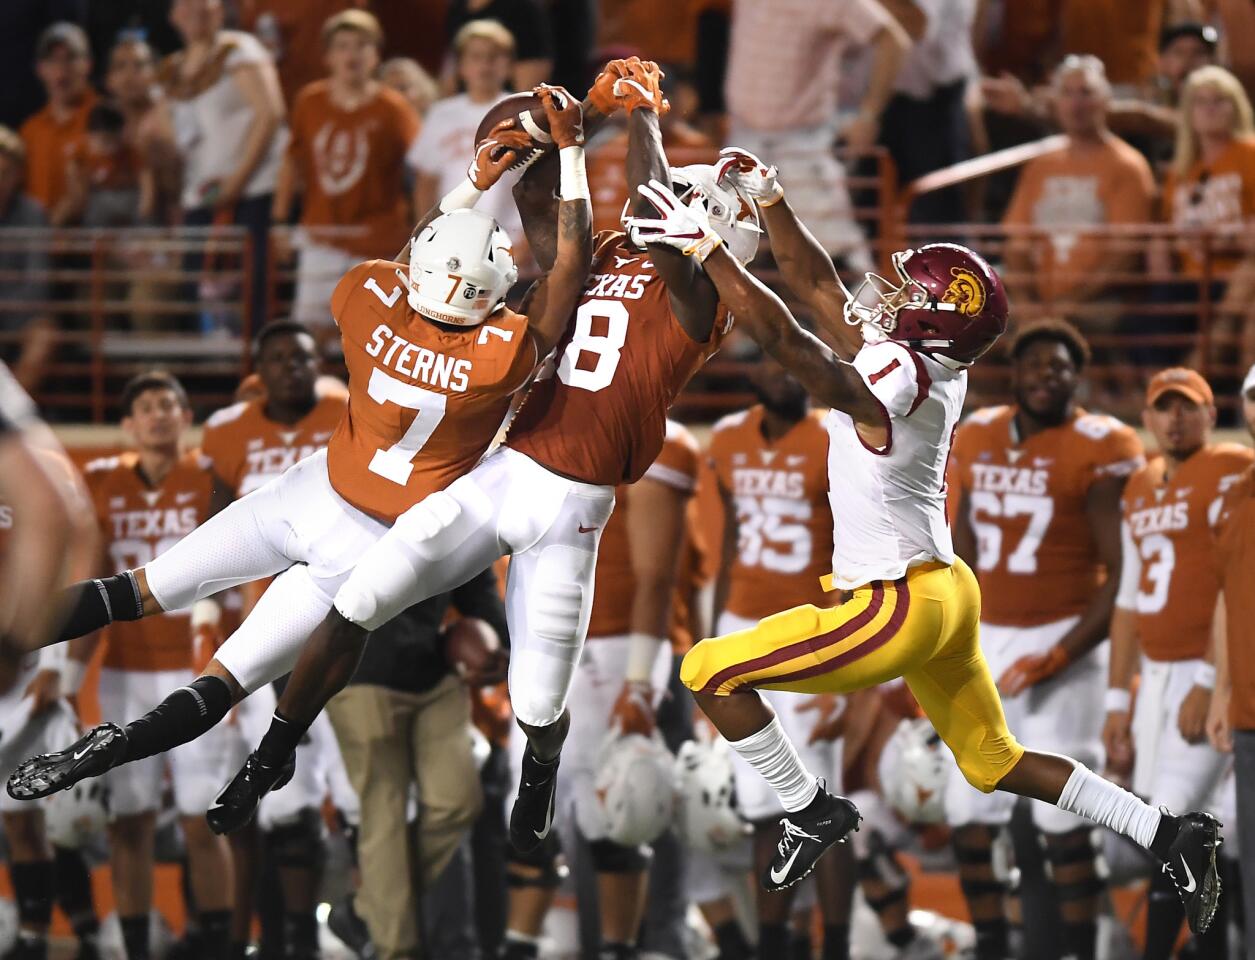 USC receiver Velus Jones can't make the catch as Texas defenders Caden Sterns (7) and Davante Davis defend in the second quarter at Royal-Texas Memorial Stadium on Saturday.